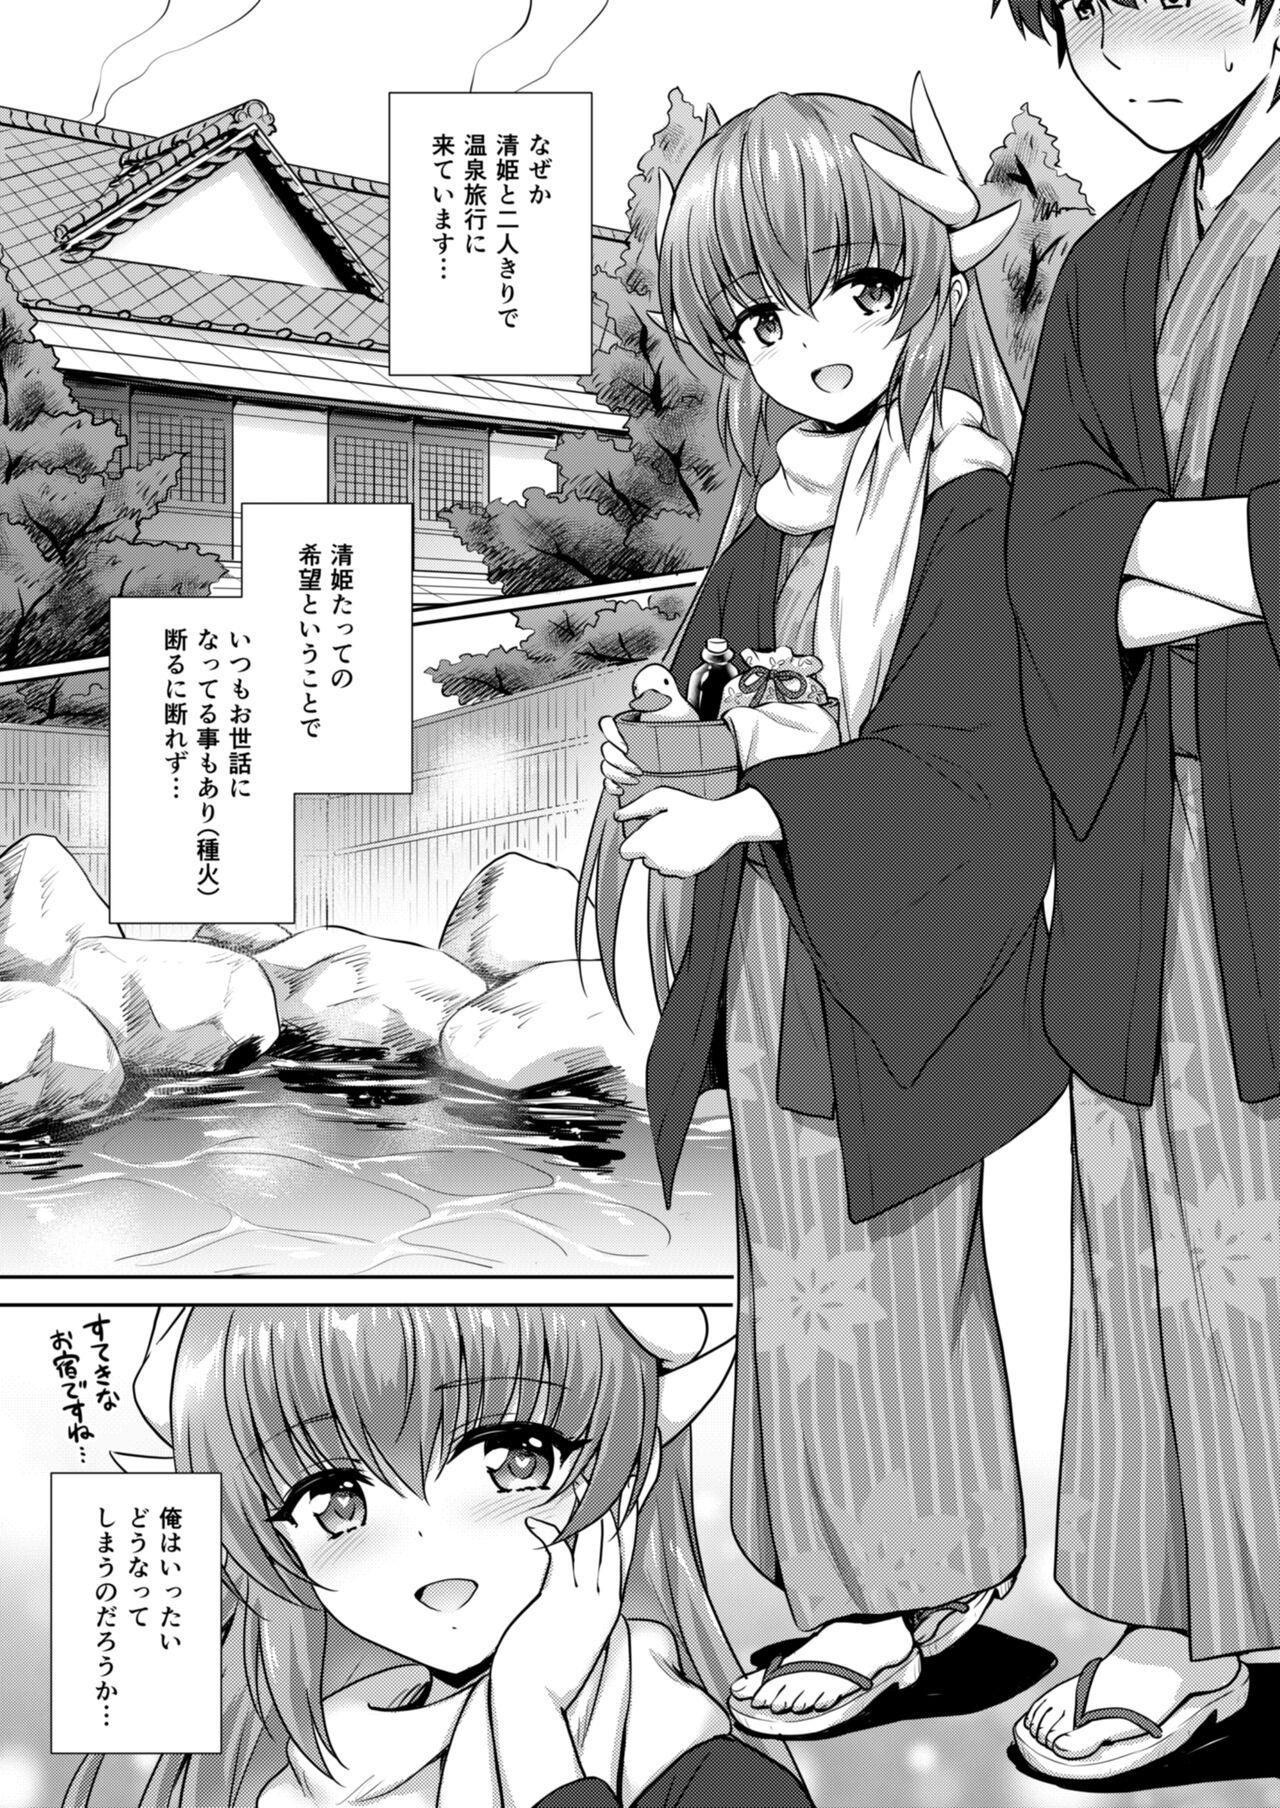 Women Kiyohime Onsen - Fate grand order Roludo - Page 2